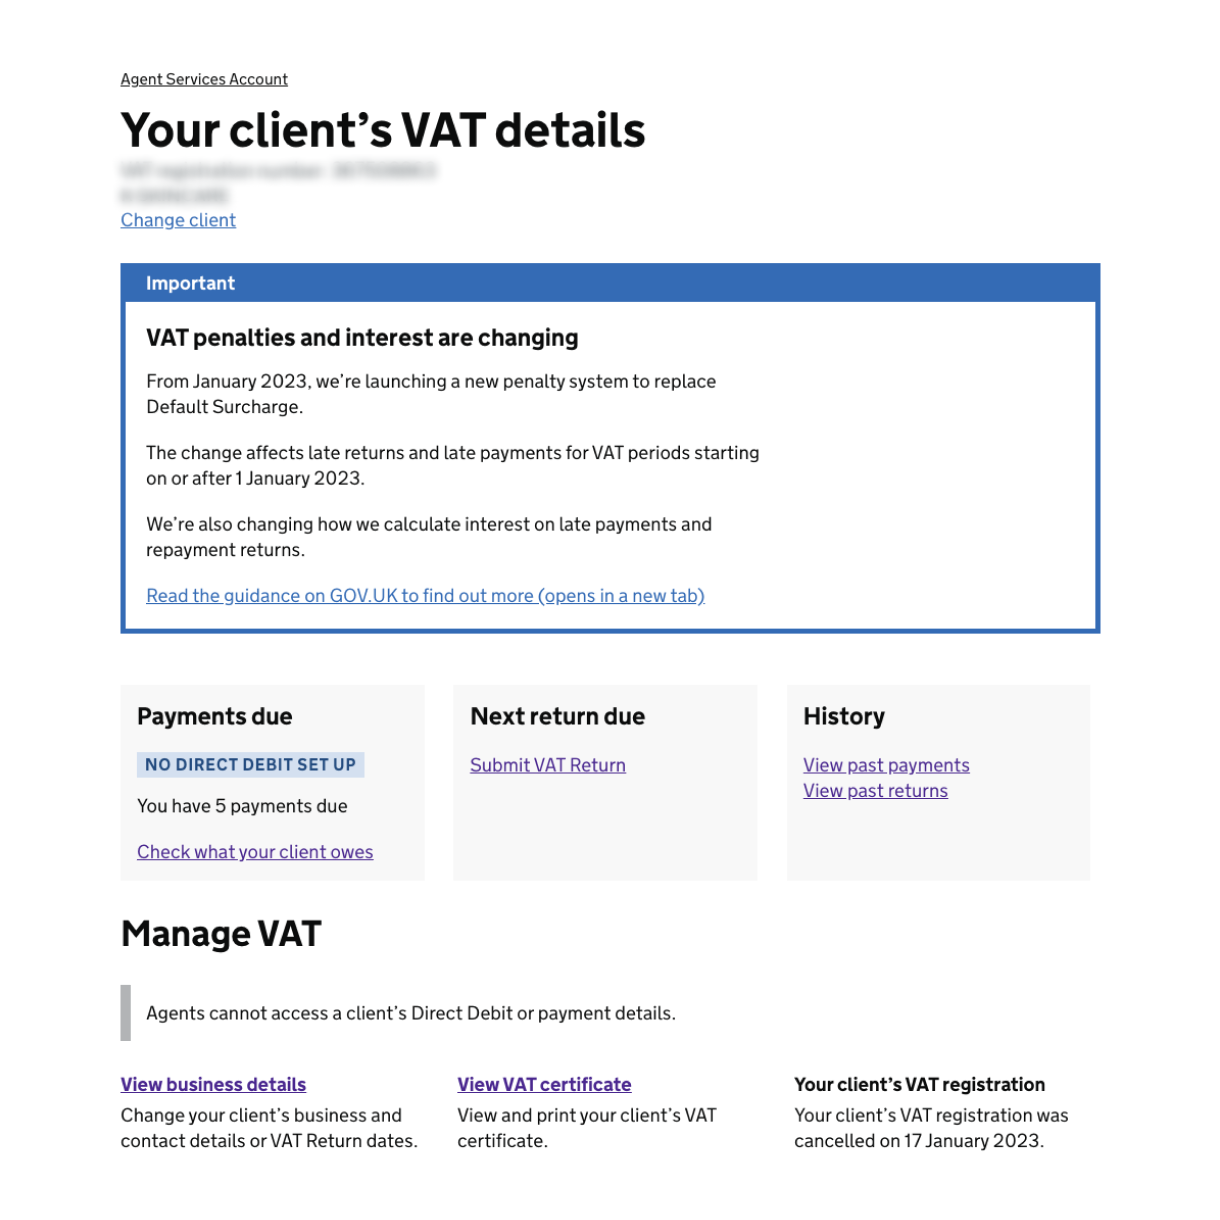 How To View Your VAT Certificate?